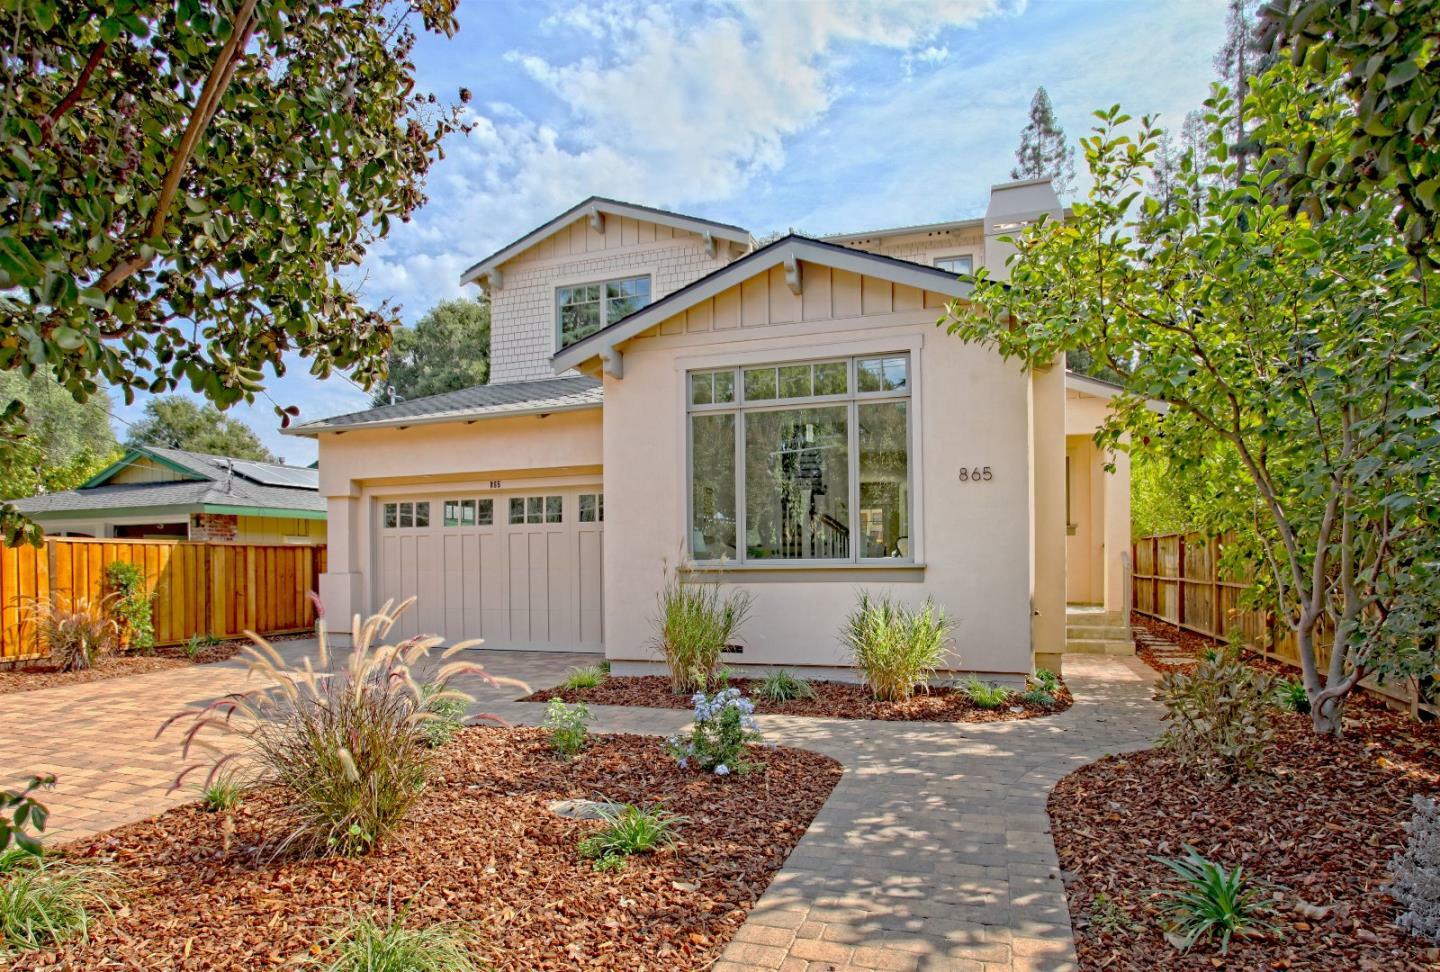 Property Photo:  865 Middle Avenue  CA 94025 